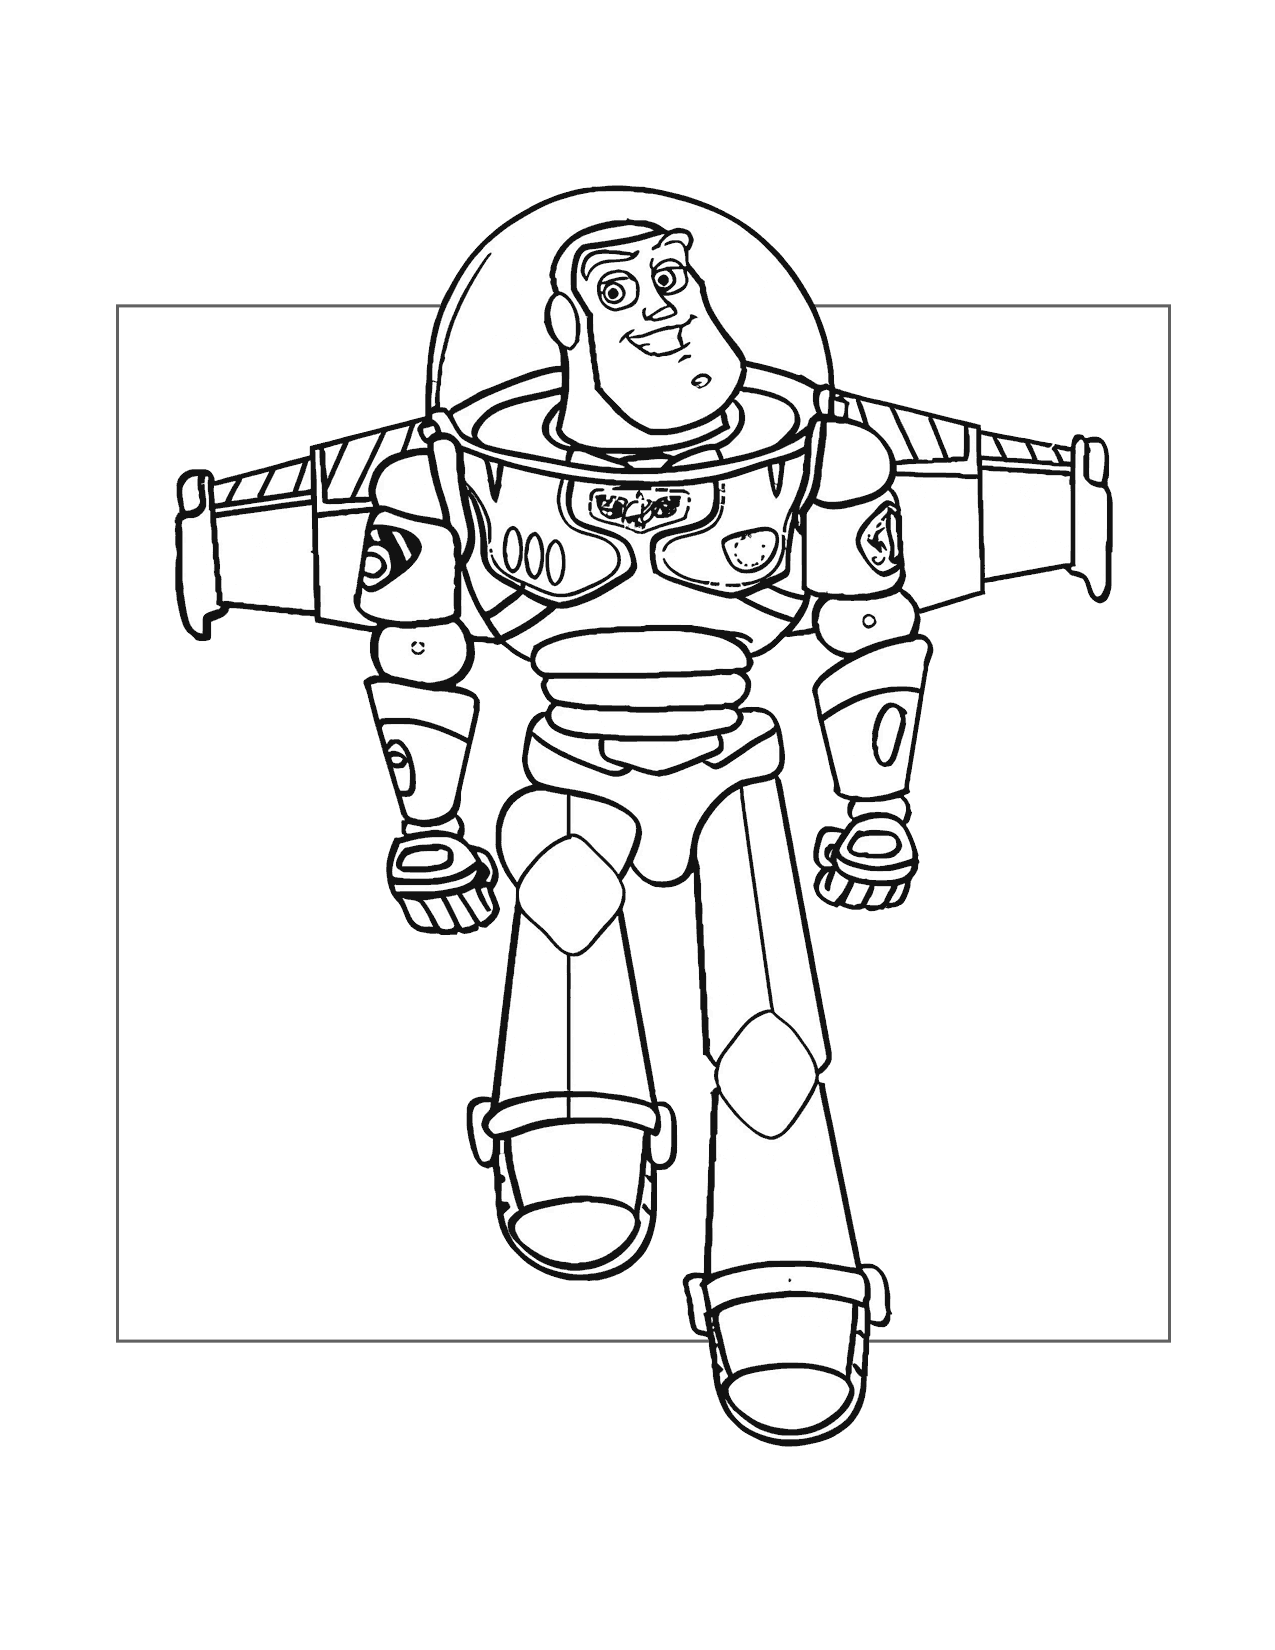 Buzz Lightyear Flies Coloring Page